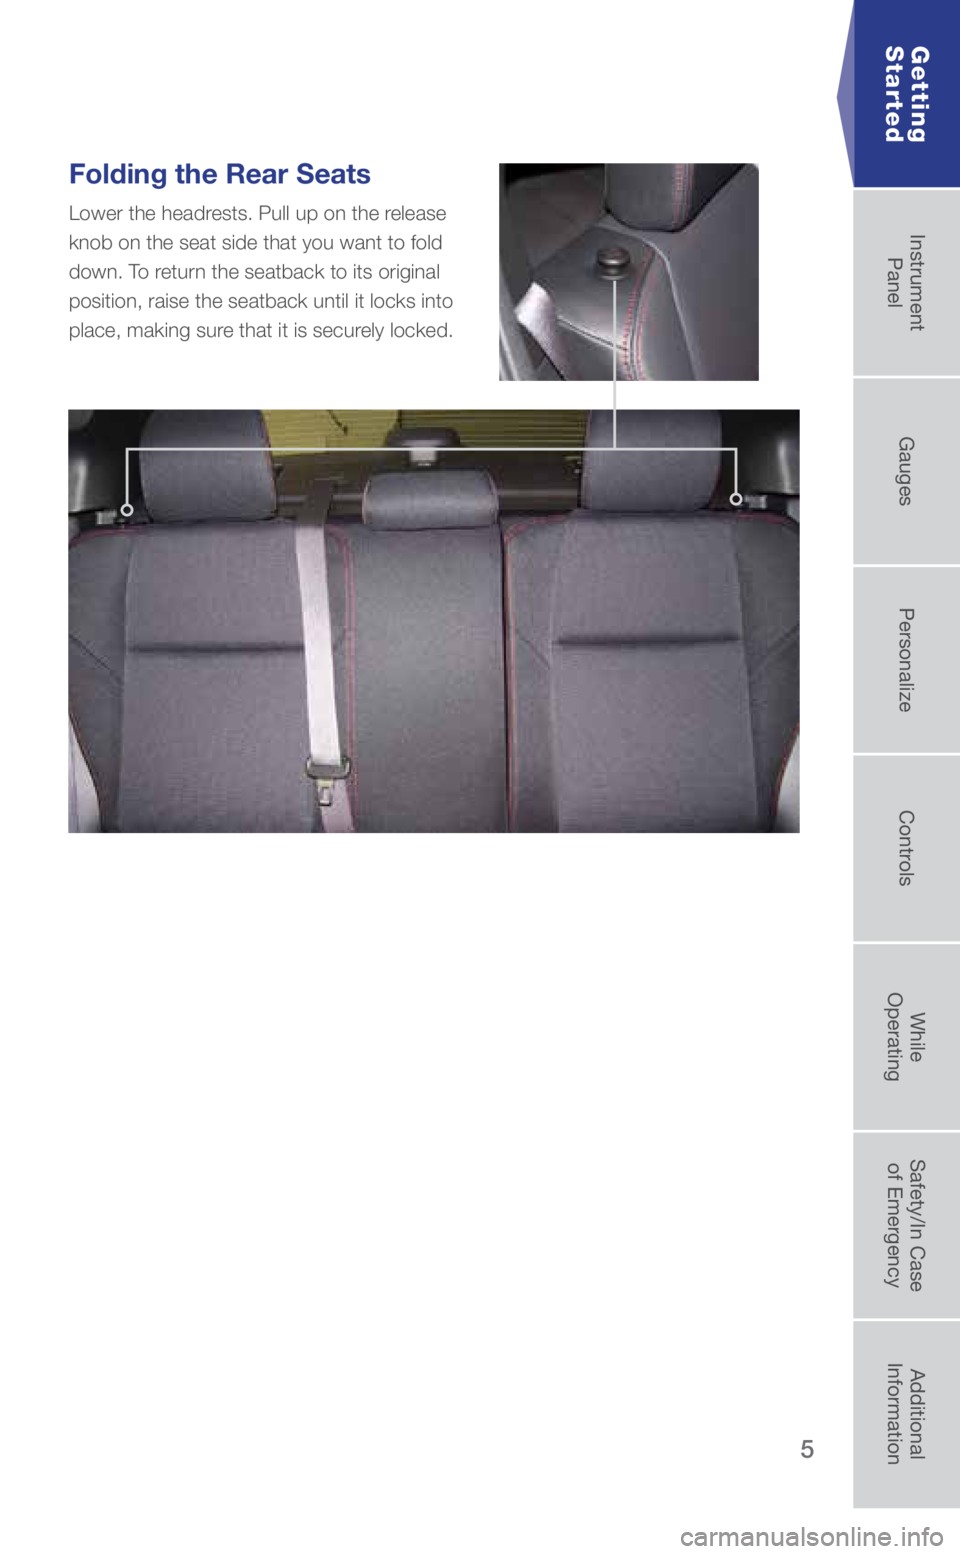 SUBARU WRX 2019  Quick Guide 5
Folding the Rear Seats
Lower the headrests. Pull up on the release 
knob on the seat side that you want to fold 
down. To return the seatback to its original 
position, raise the seatback until it l